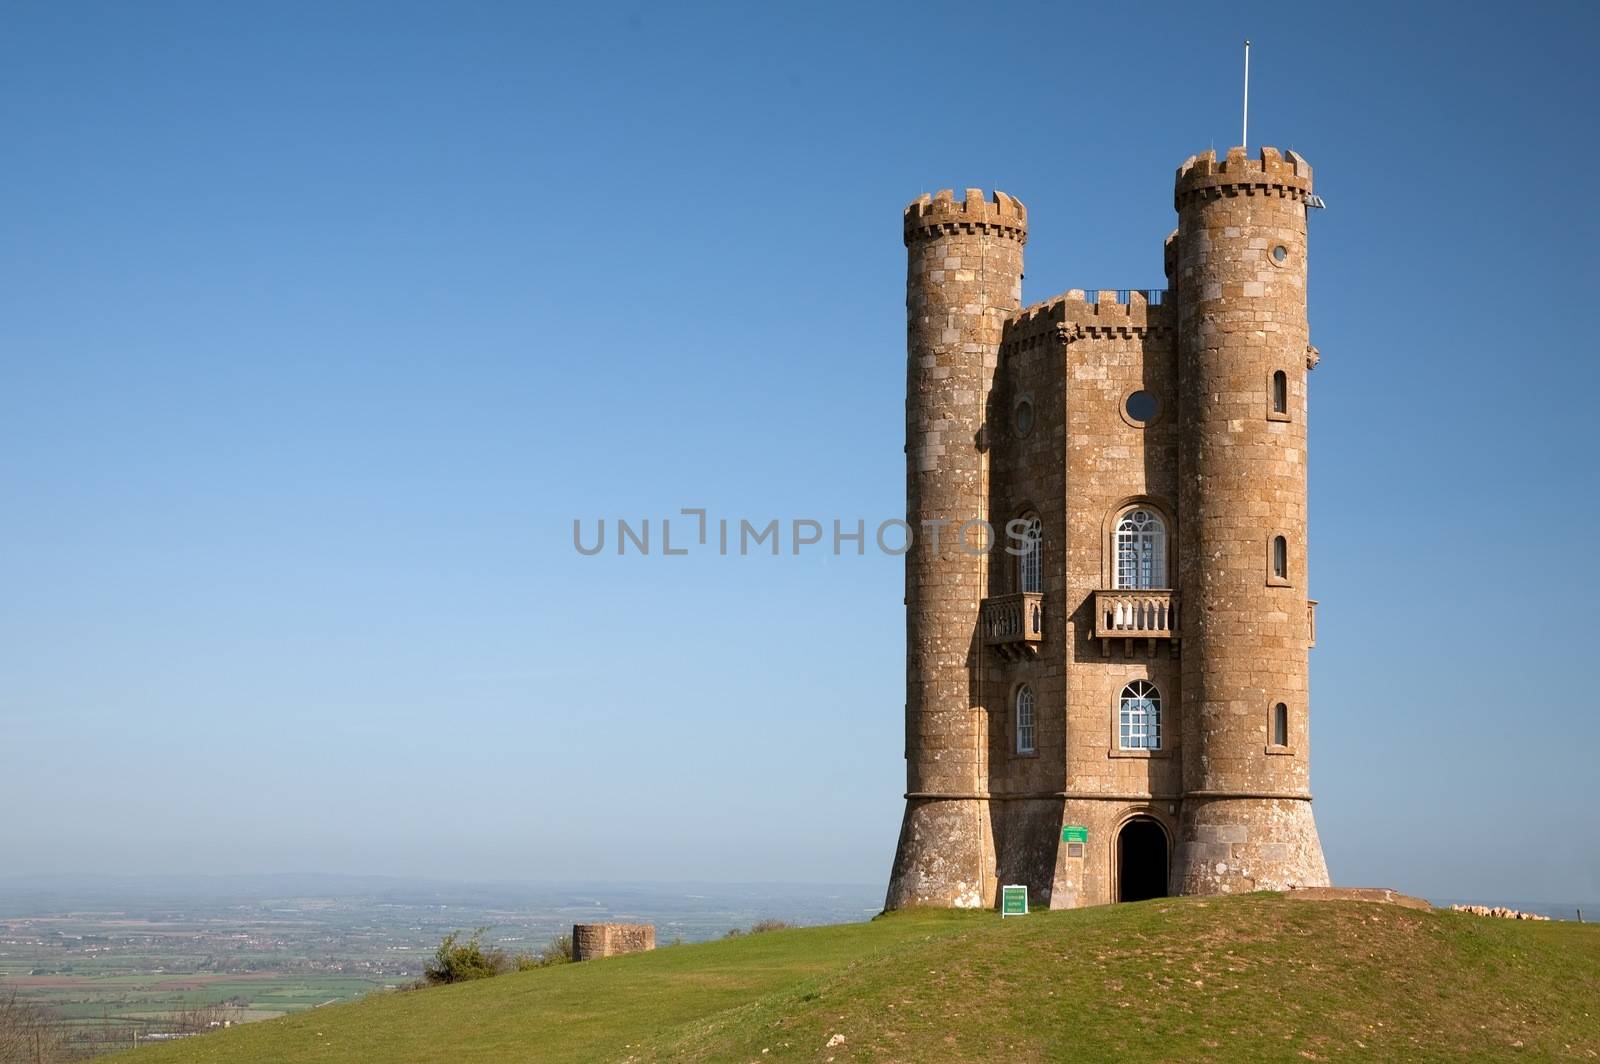 The Cotswold landmark of Broadway Tower, Worcestershire, England.